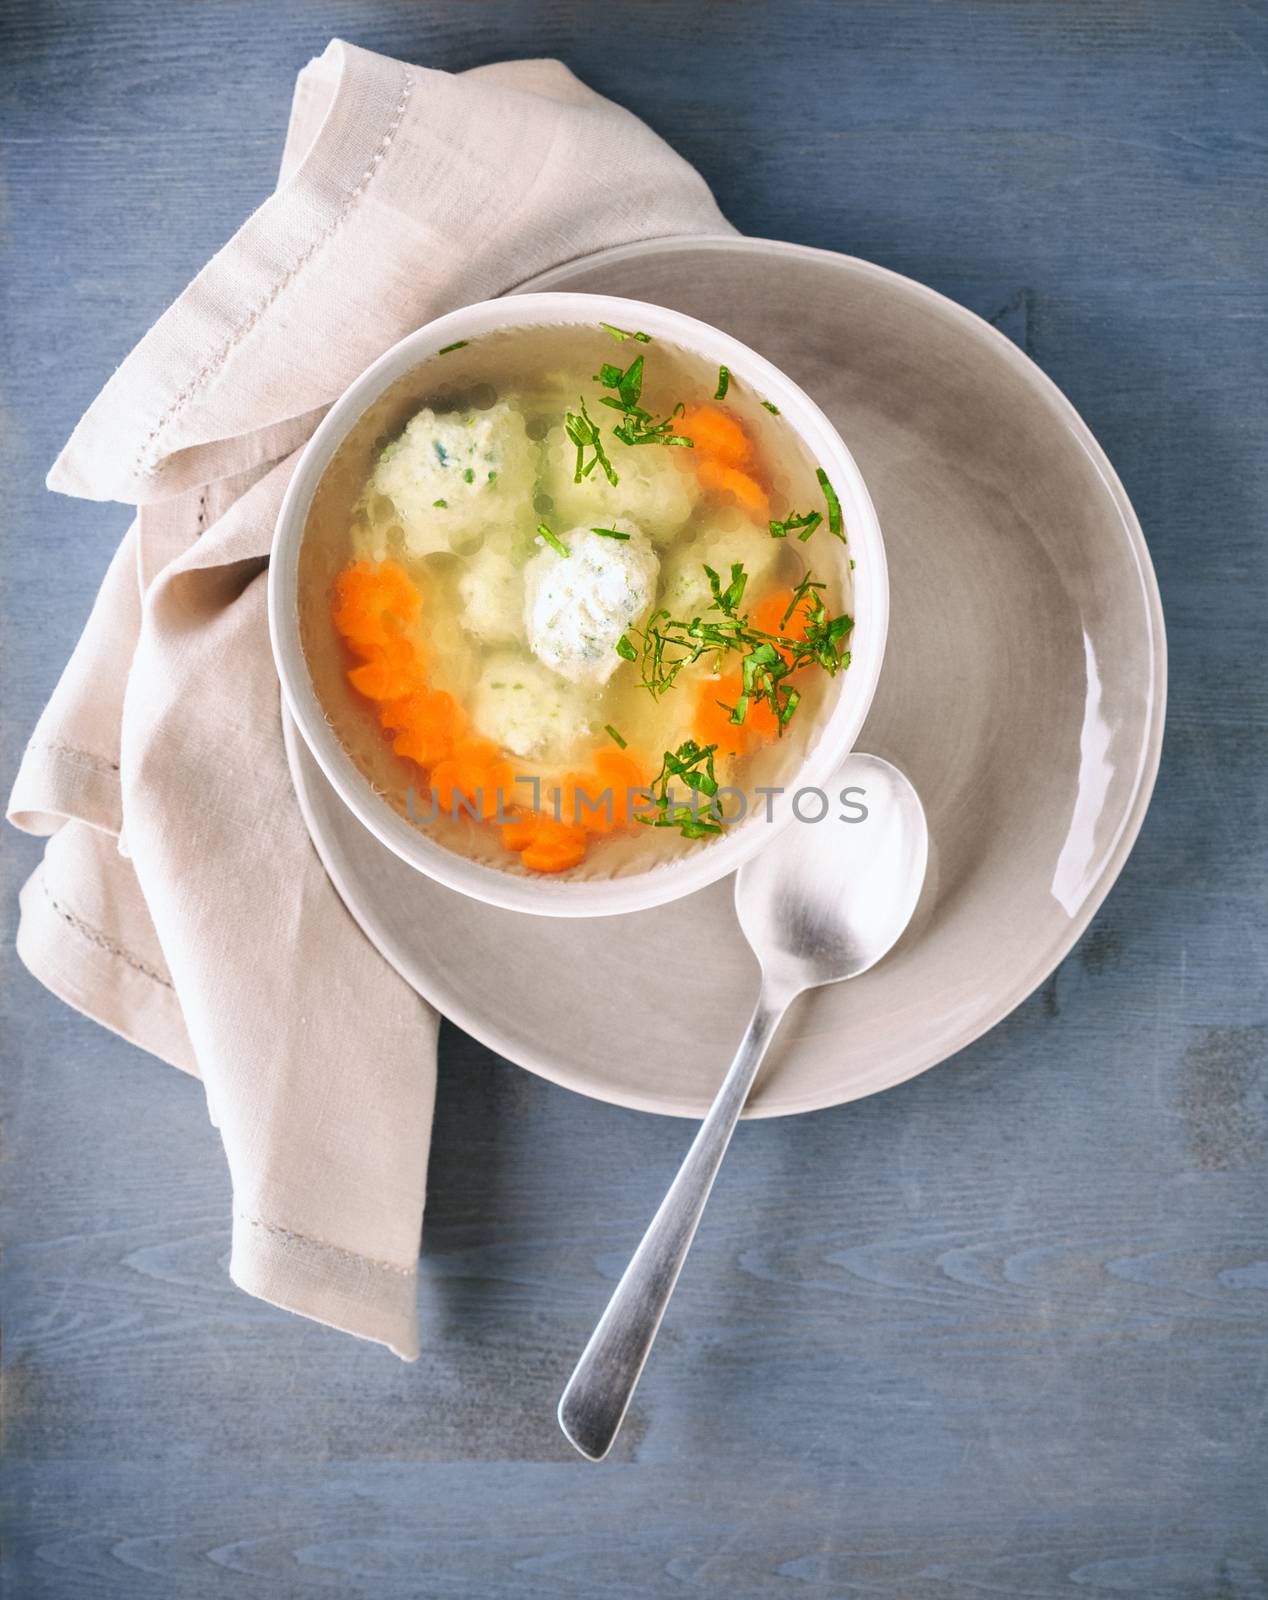 Soup with chicken meatballs and vegetables on a table